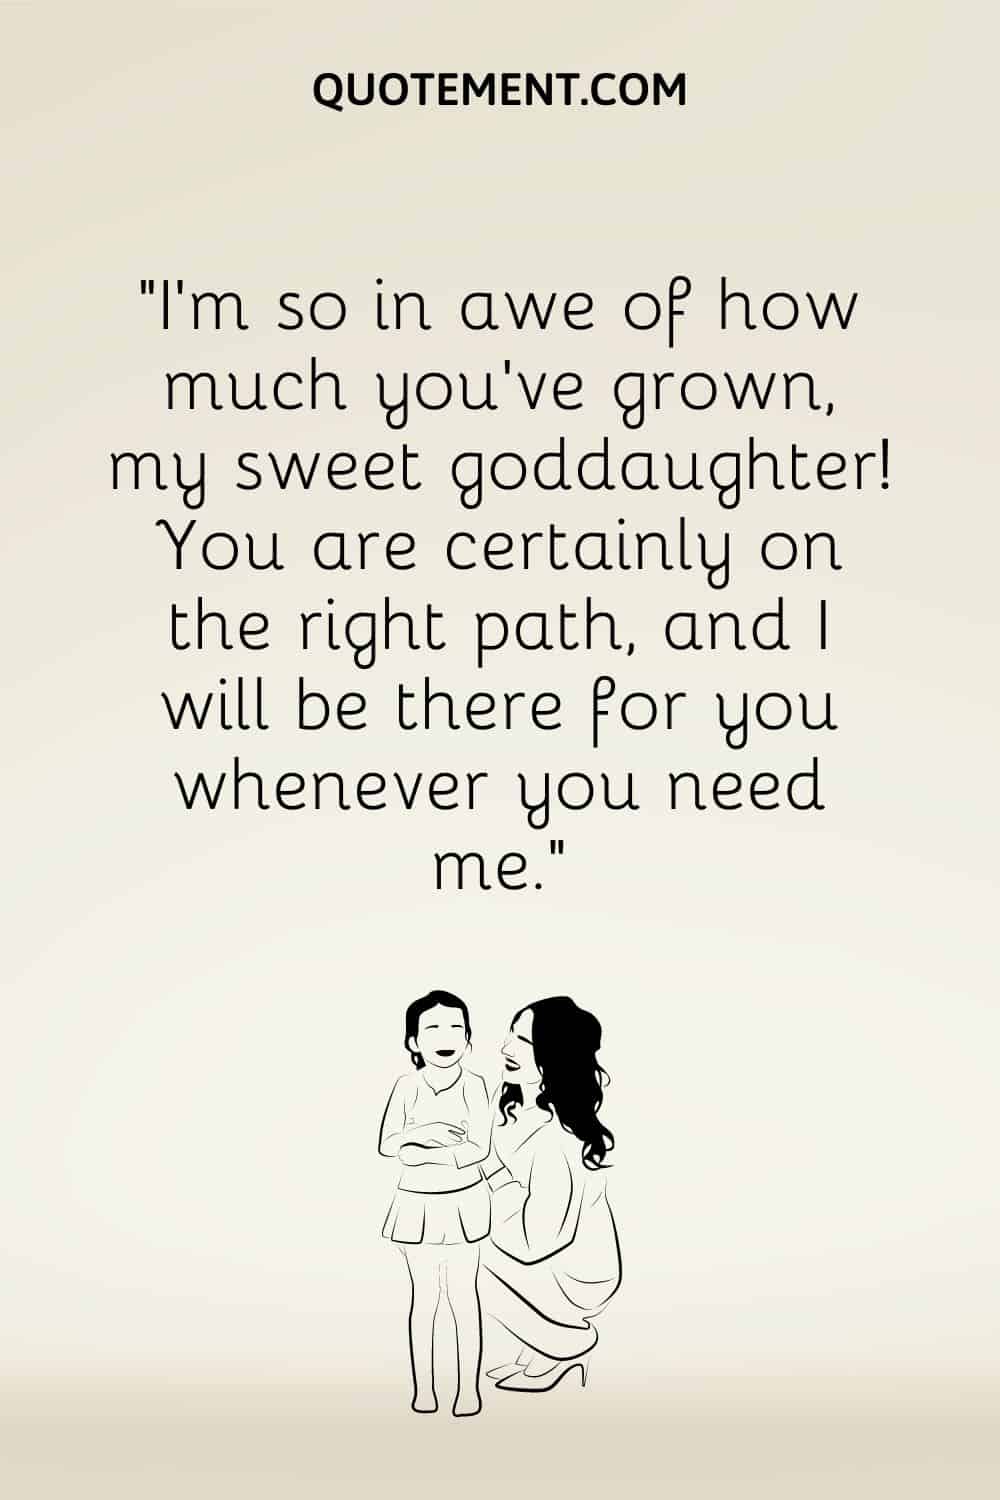 “I’m so in awe of how much you’ve grown, my sweet goddaughter! You are certainly on the right path, and I will be there for you whenever you need me.”